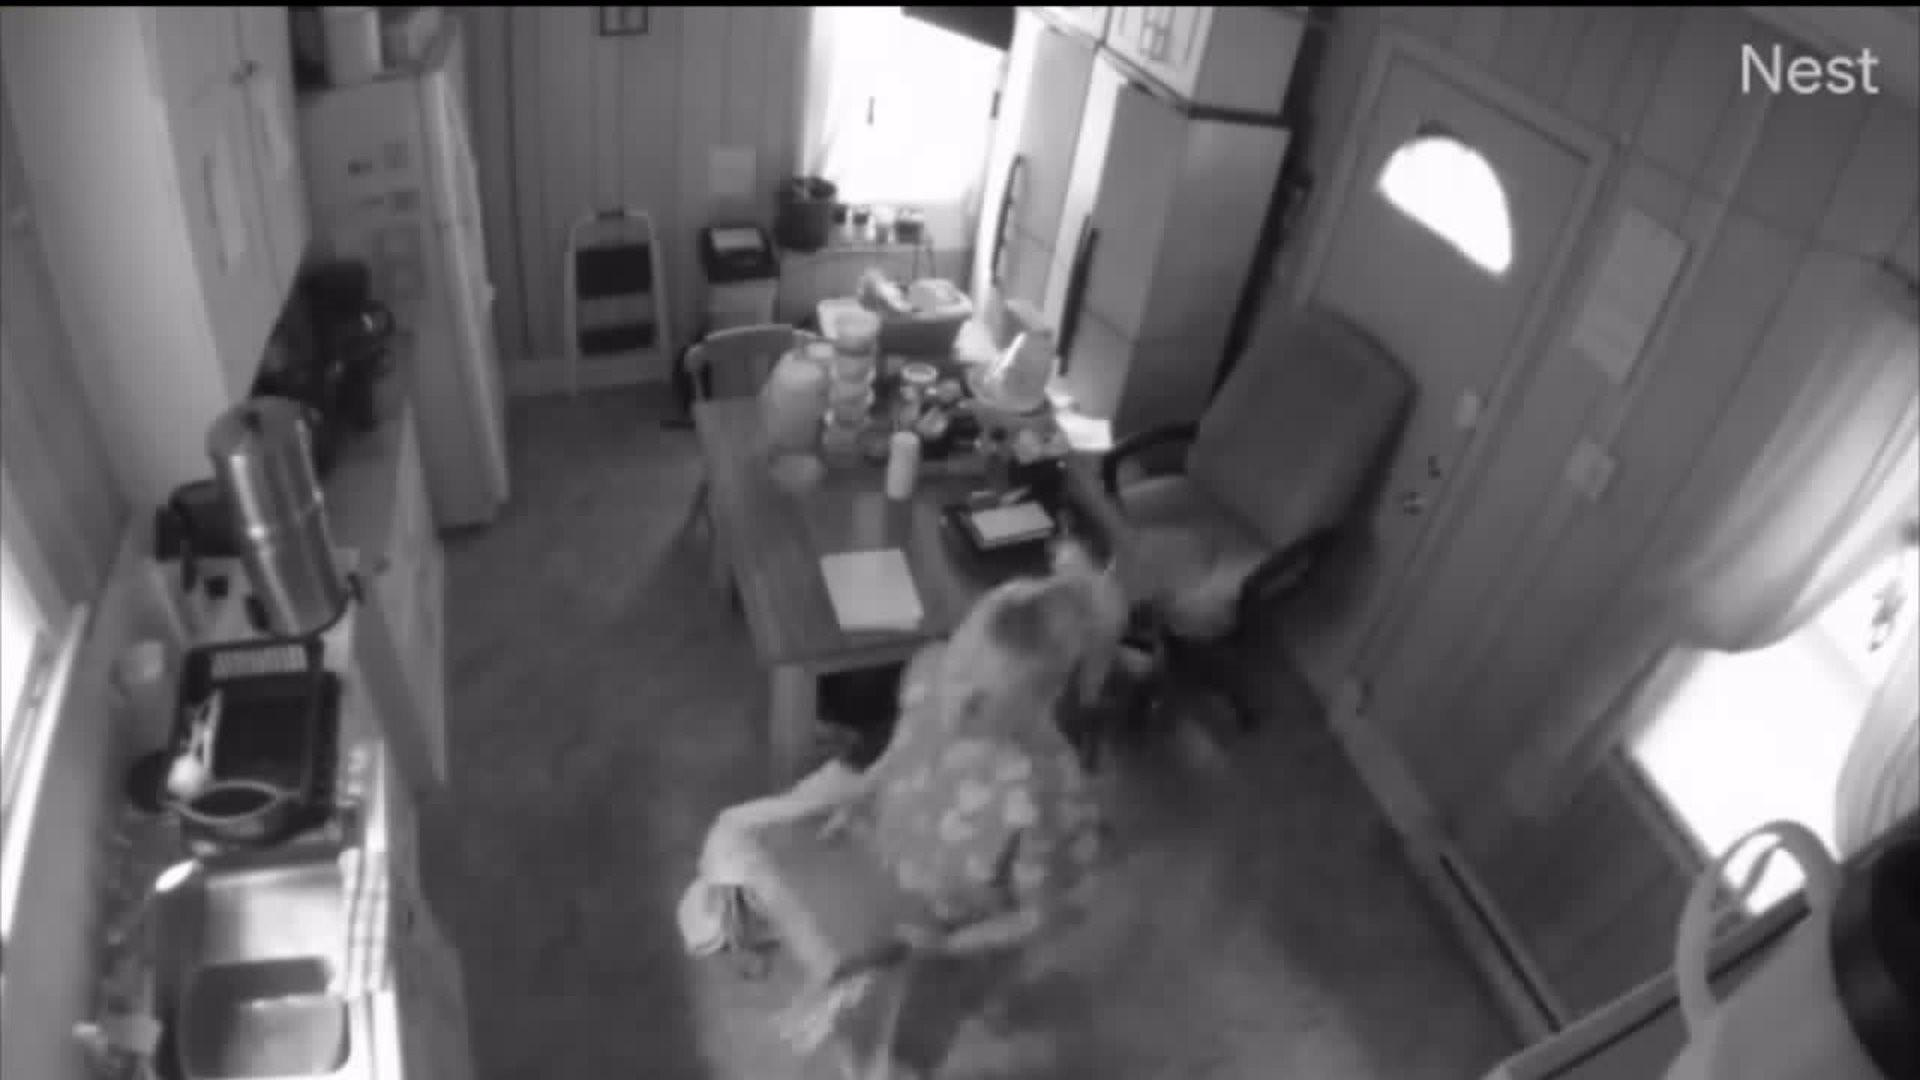 Home Health Aide Suspected of Theft Caught on Camera